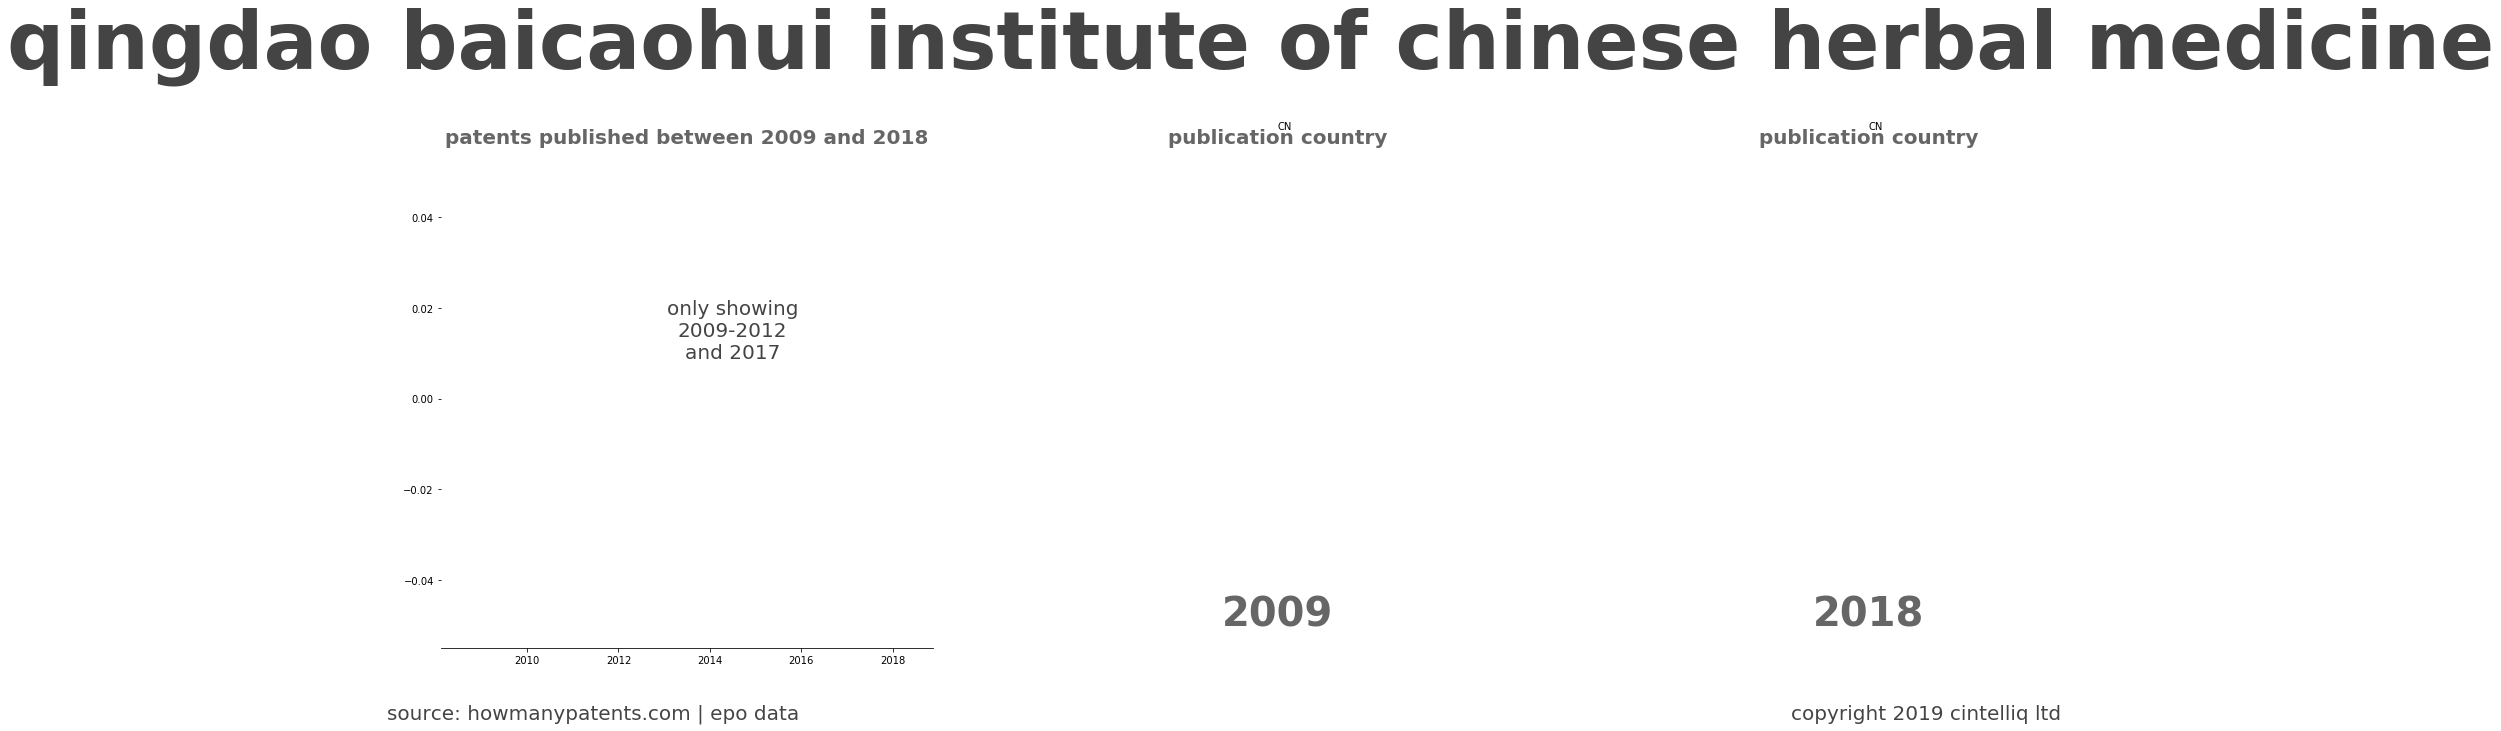 summary of patents for Qingdao Baicaohui Institute Of Chinese Herbal Medicine